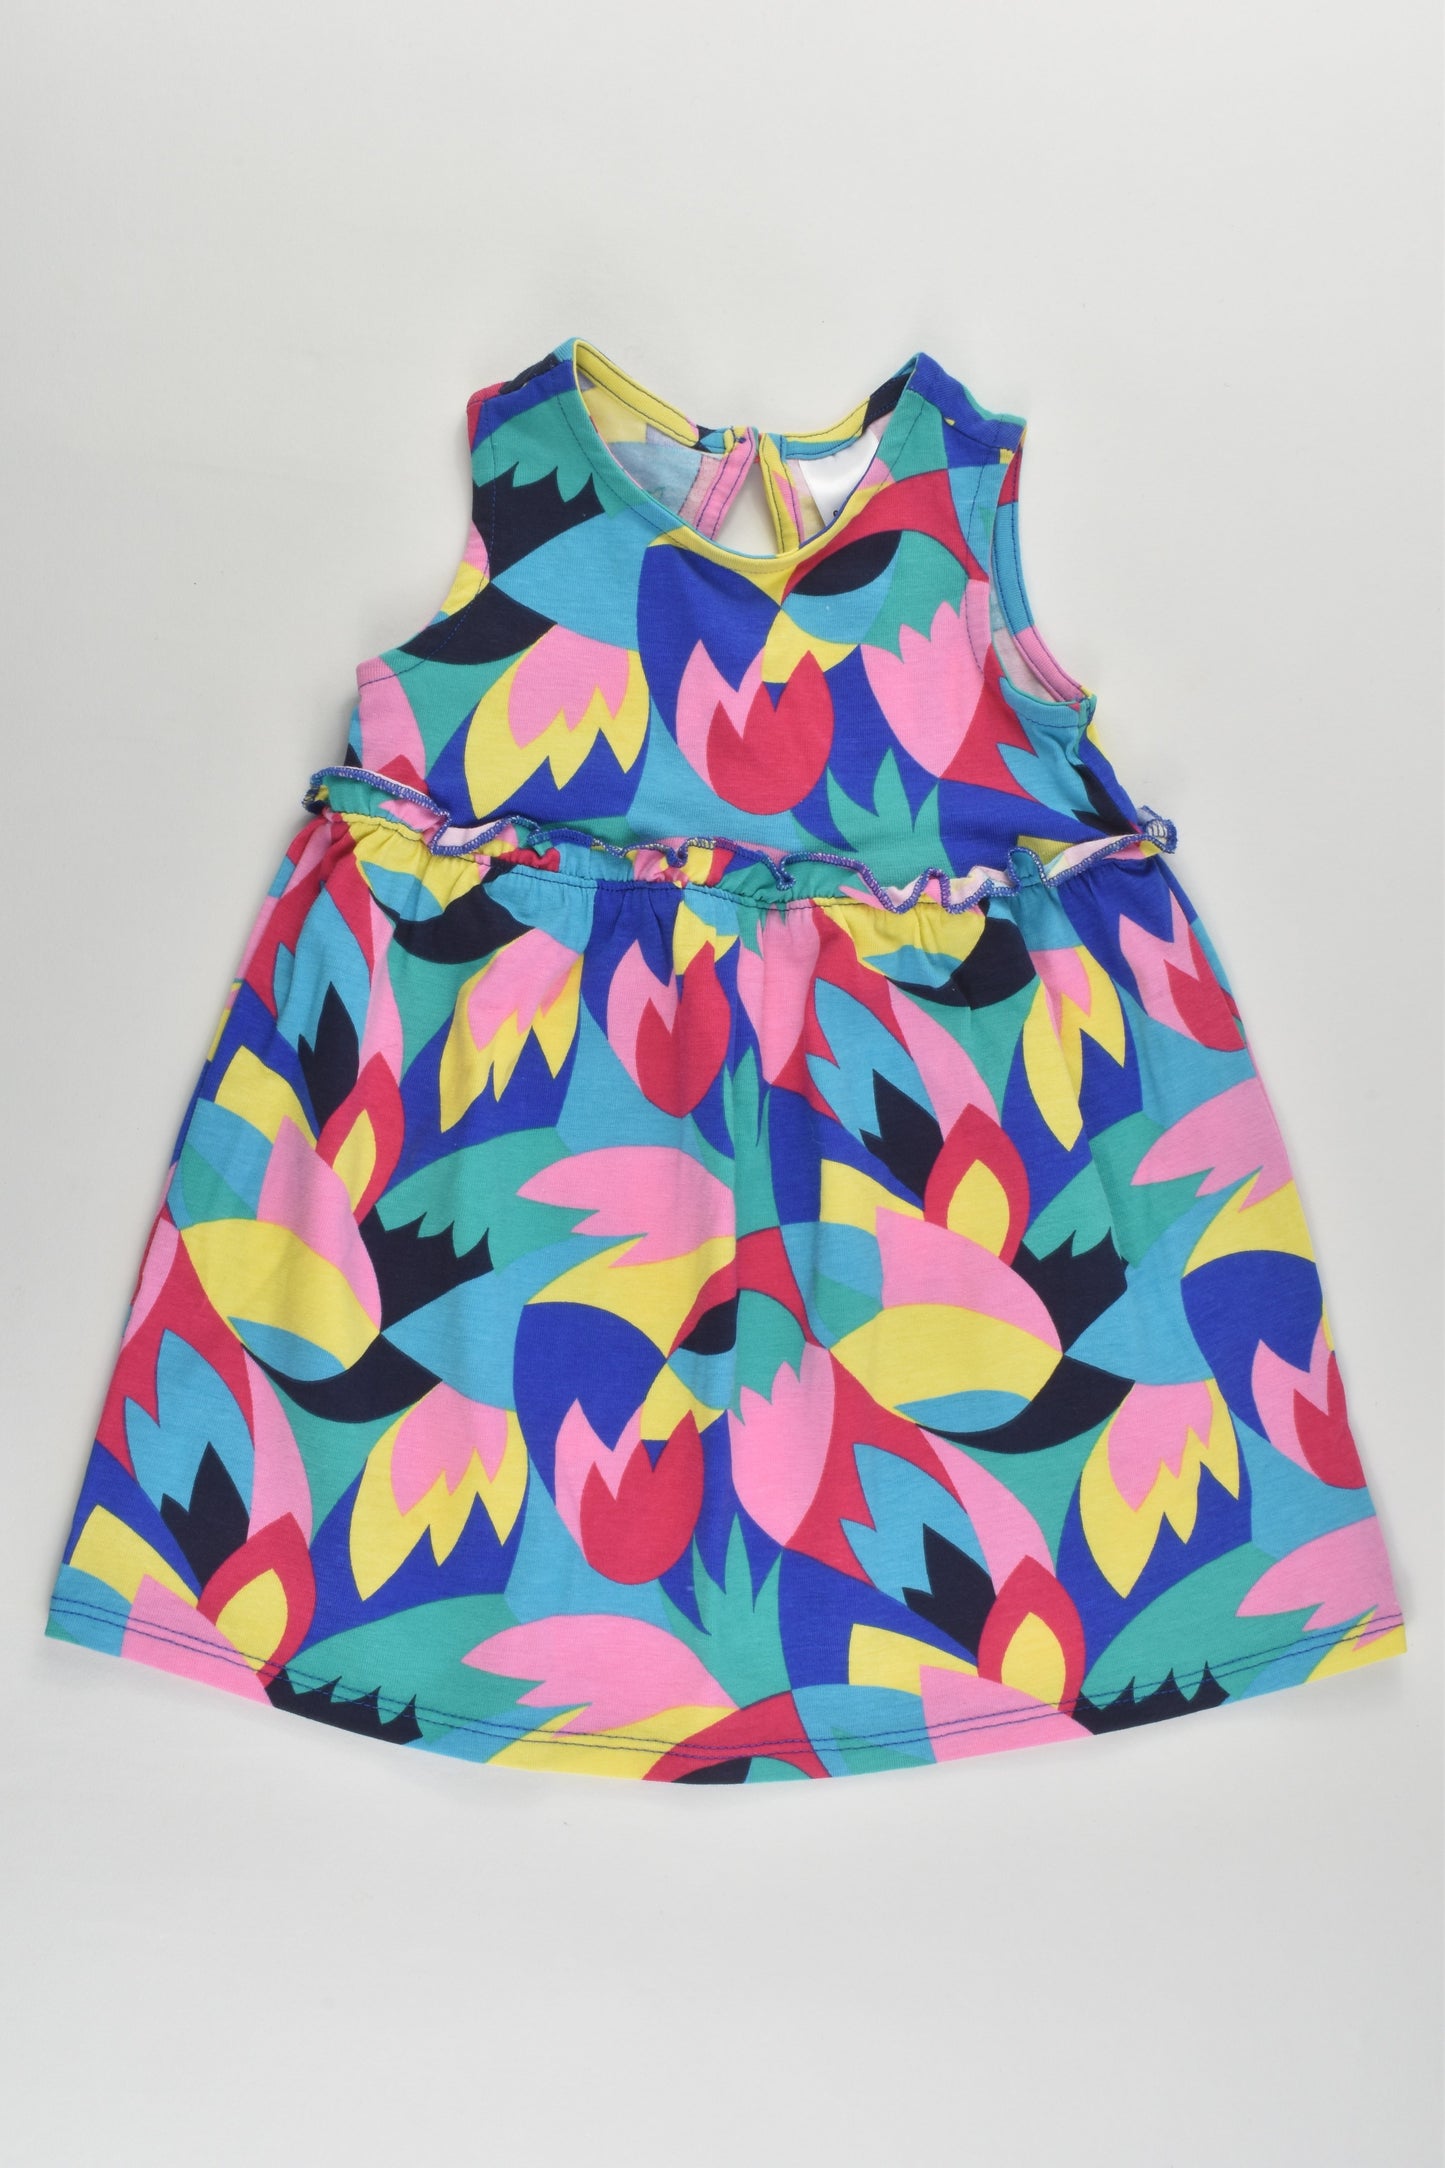 Target Size 0 (6-12 months) Colorful Dress